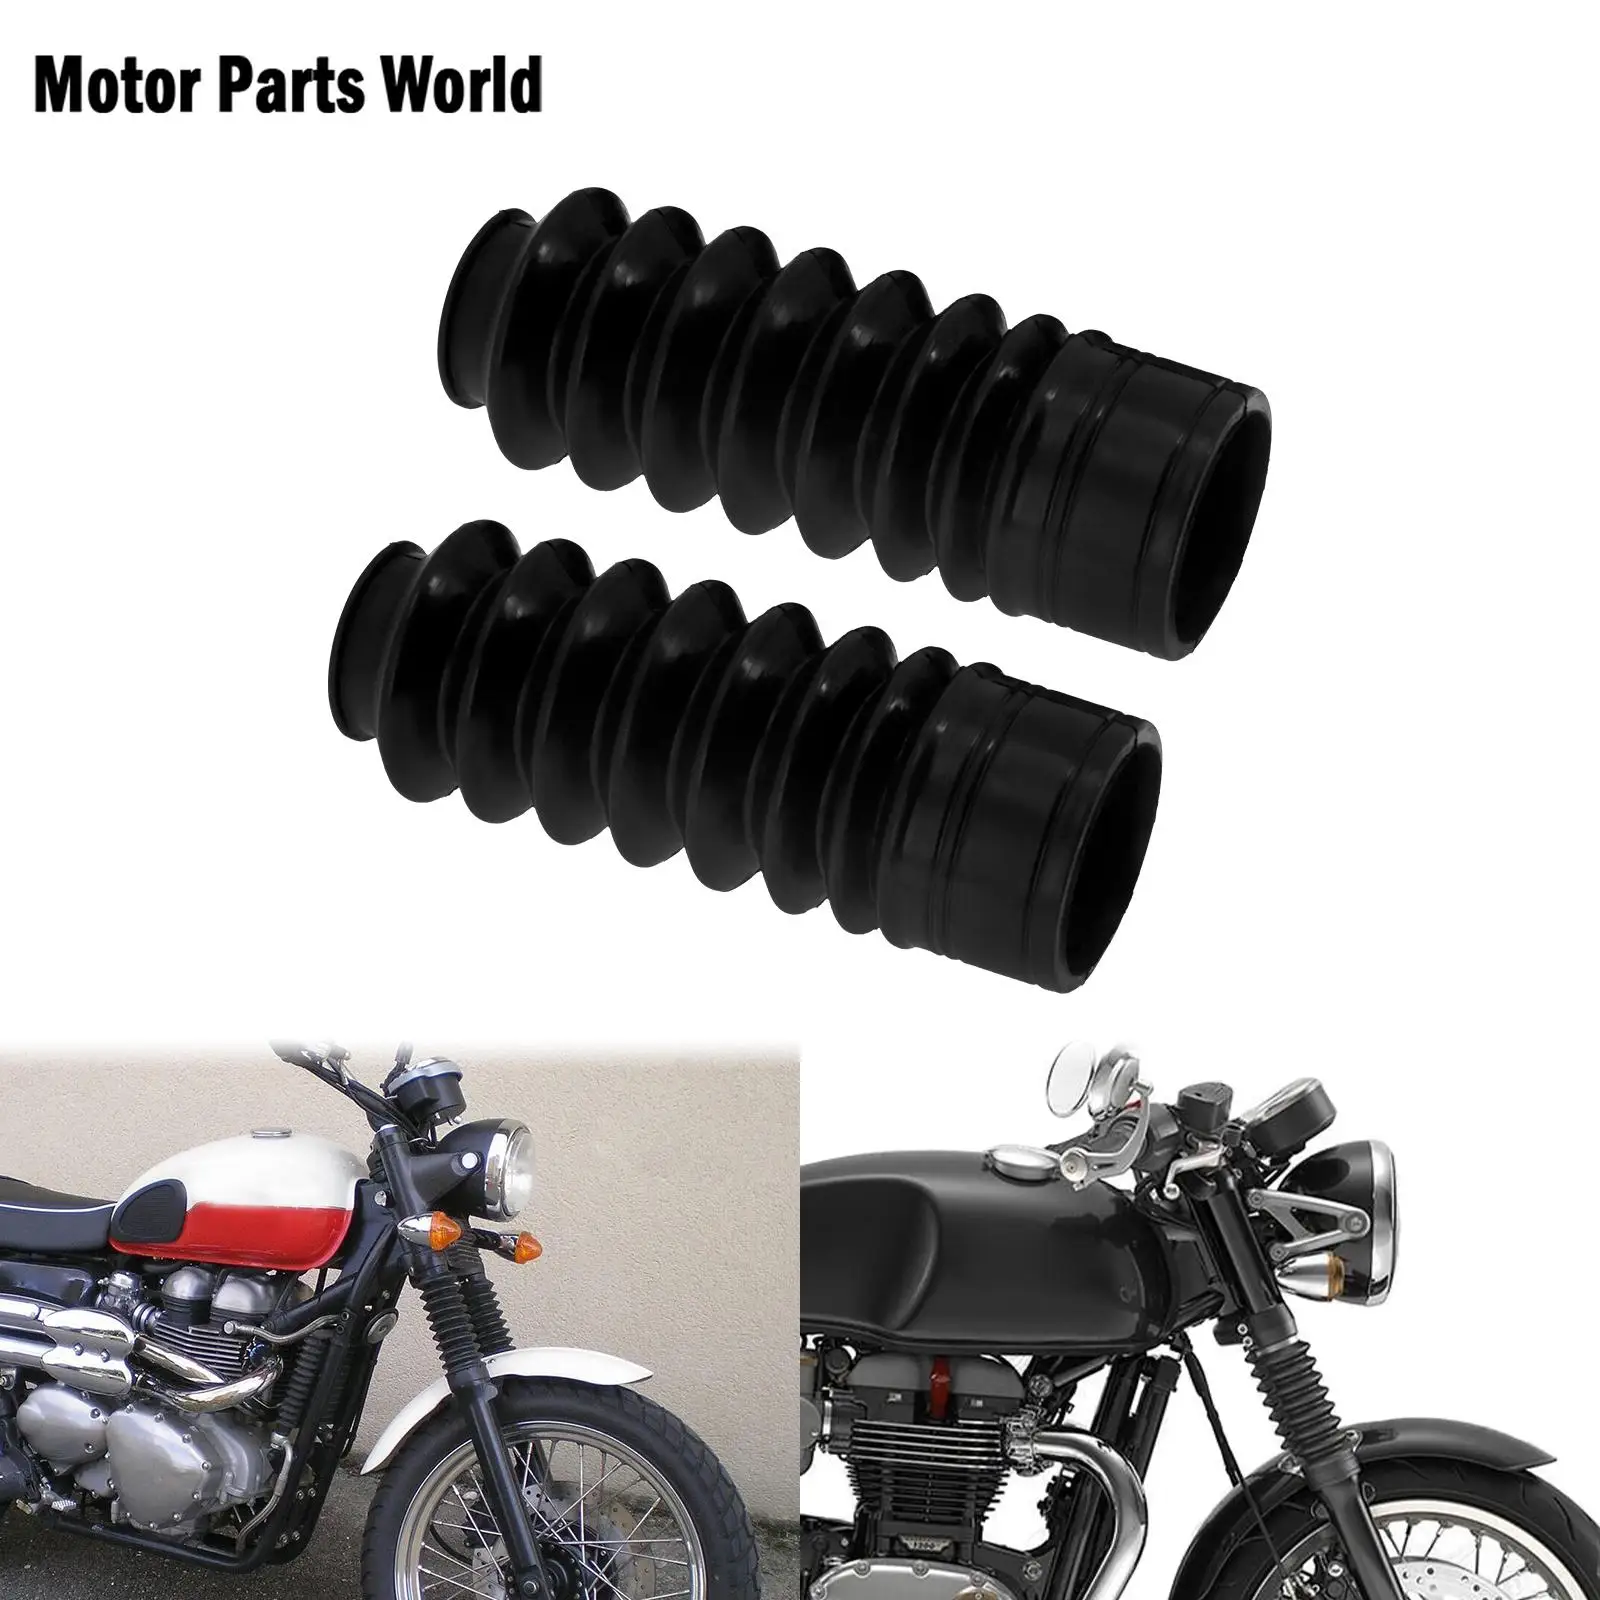 2XMotorcycle Front Fork Cover Gaiters Gators Boot Protector Shock Absorber For Bonneville Bobber T100 T120 Street twin